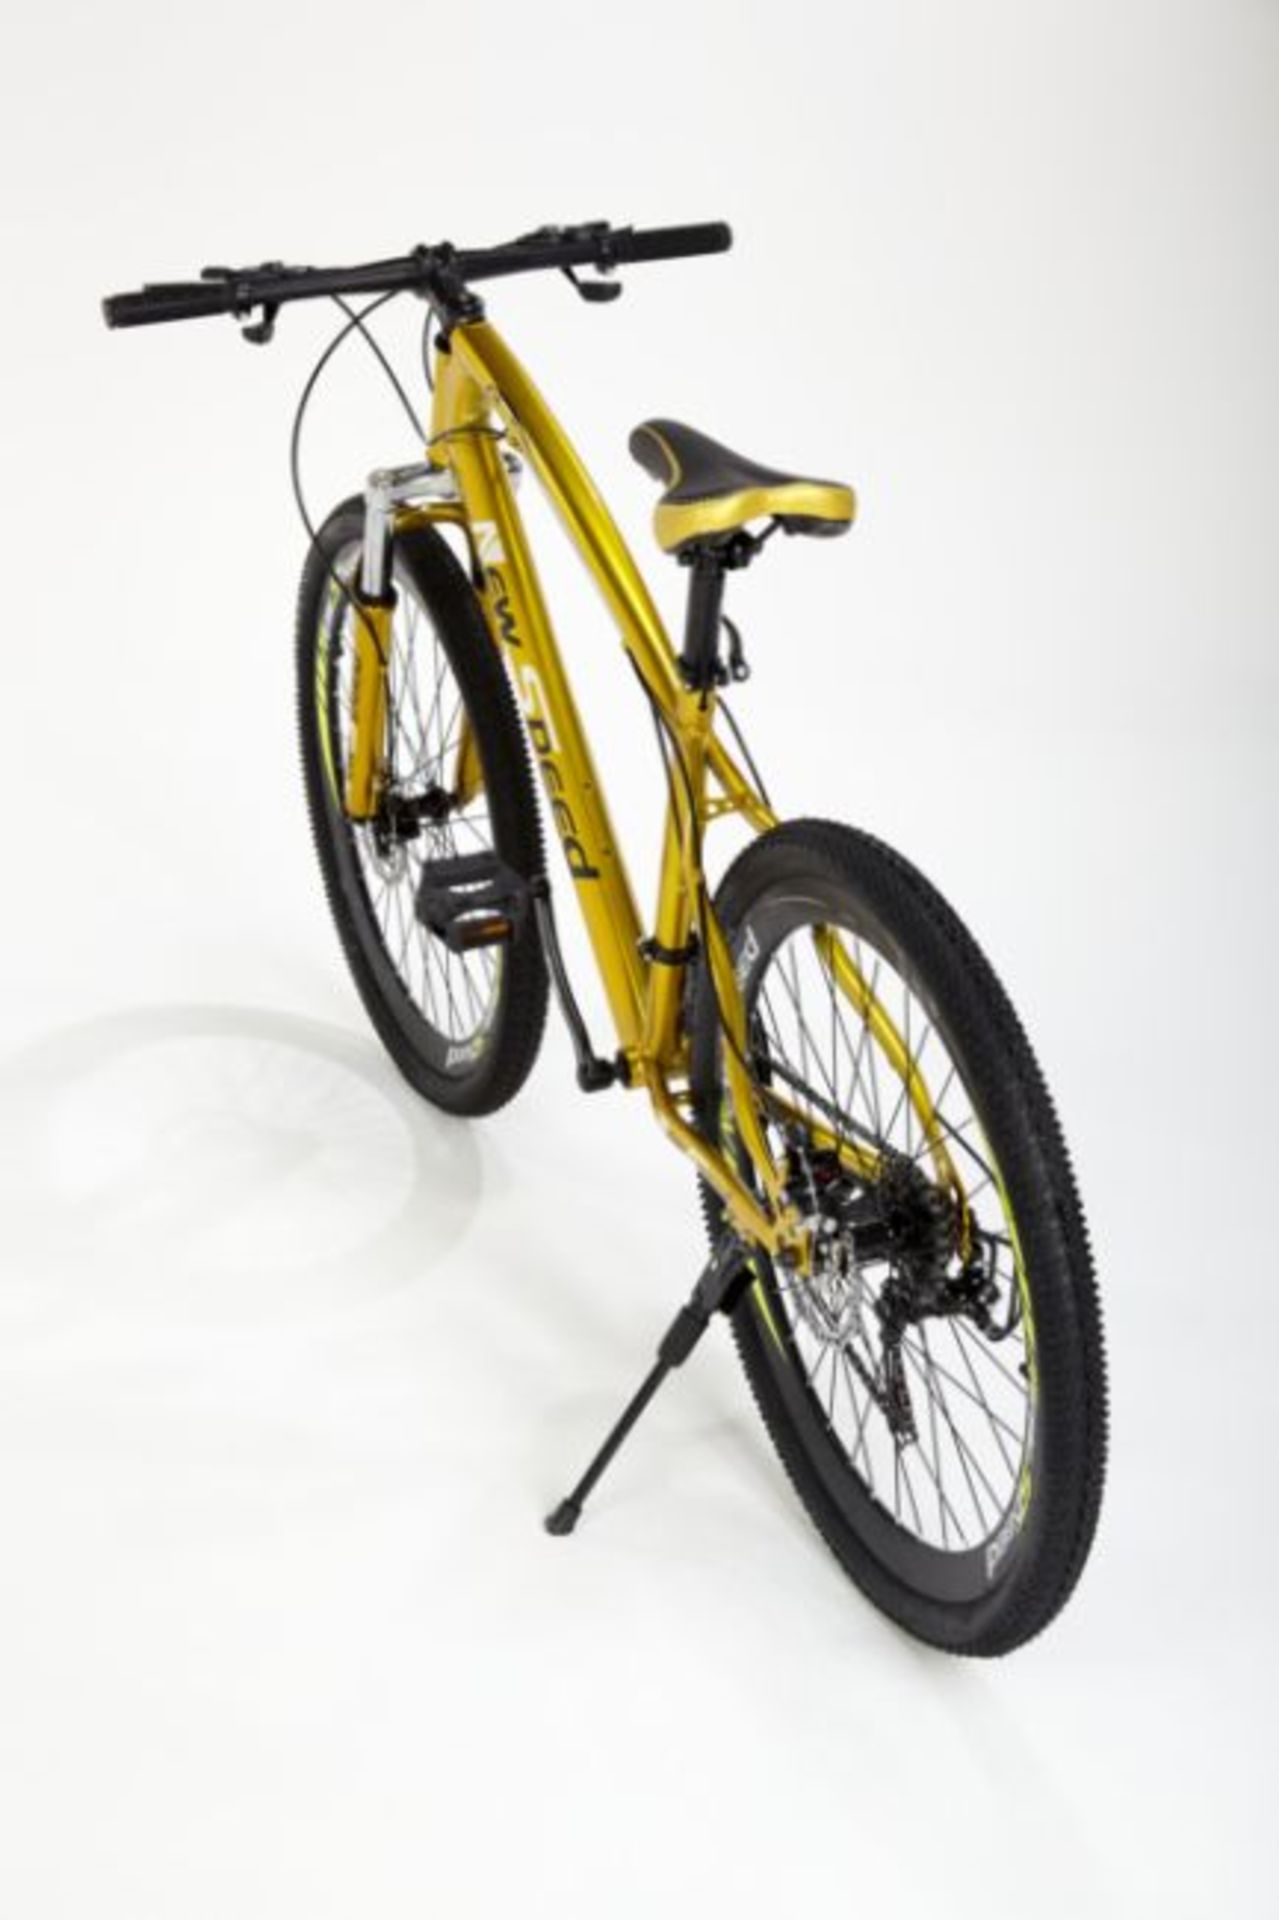 BRAND NEW NEW SPEED 21 GEARS STUNNING SUSPENSION GOLD COLOURED MOUNTAIN BIKE - Image 4 of 11